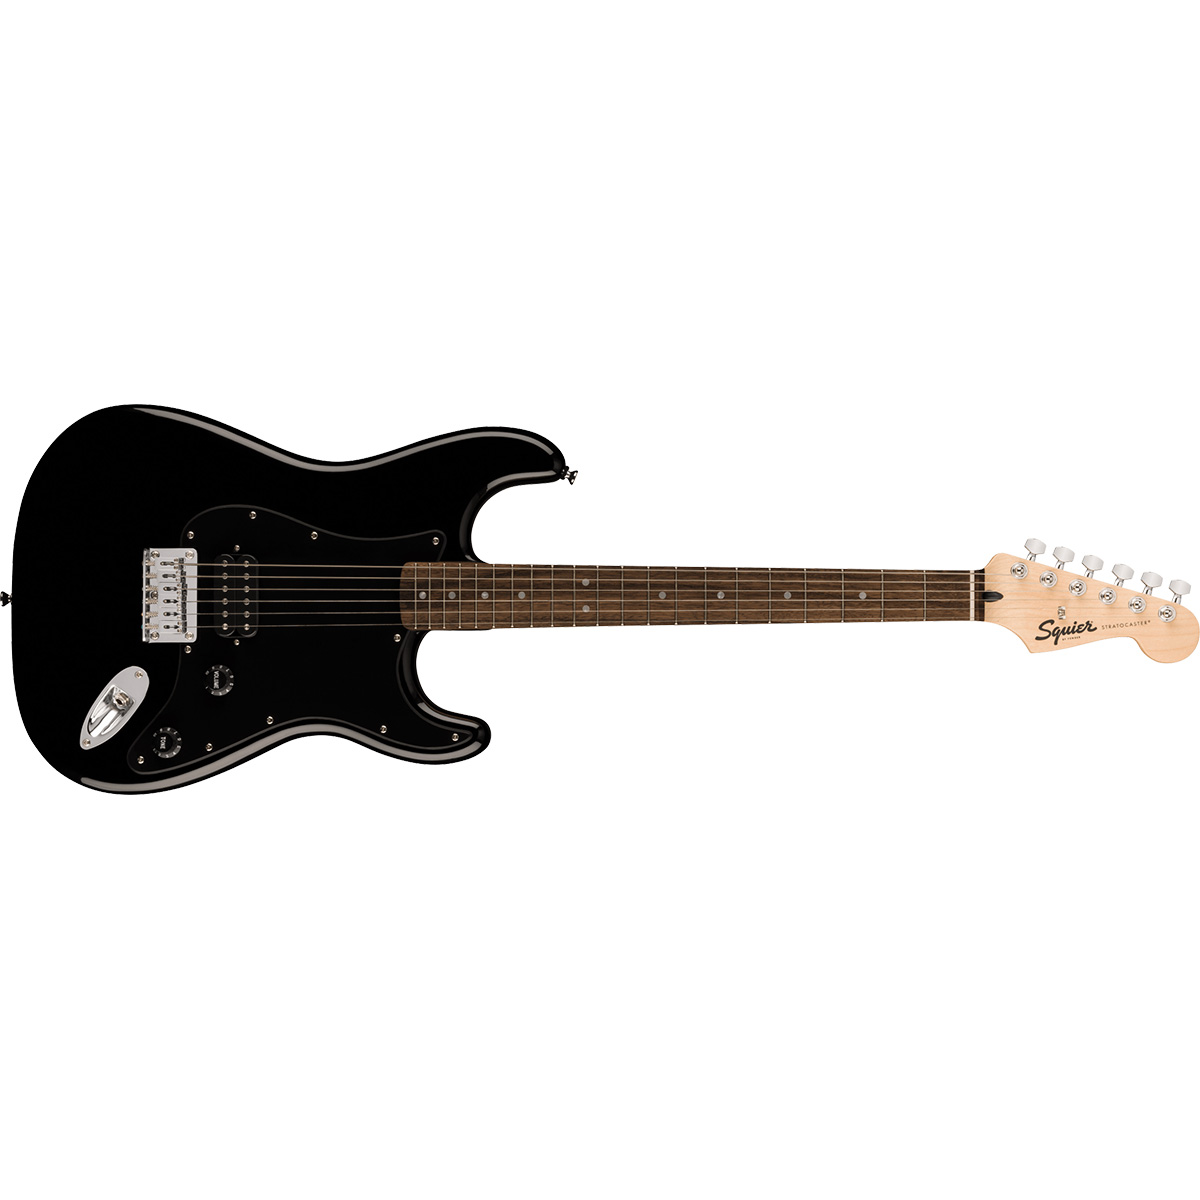 Squier by Fender SONIC STRATOCASTER HT H Black エレキギター初心者 ...